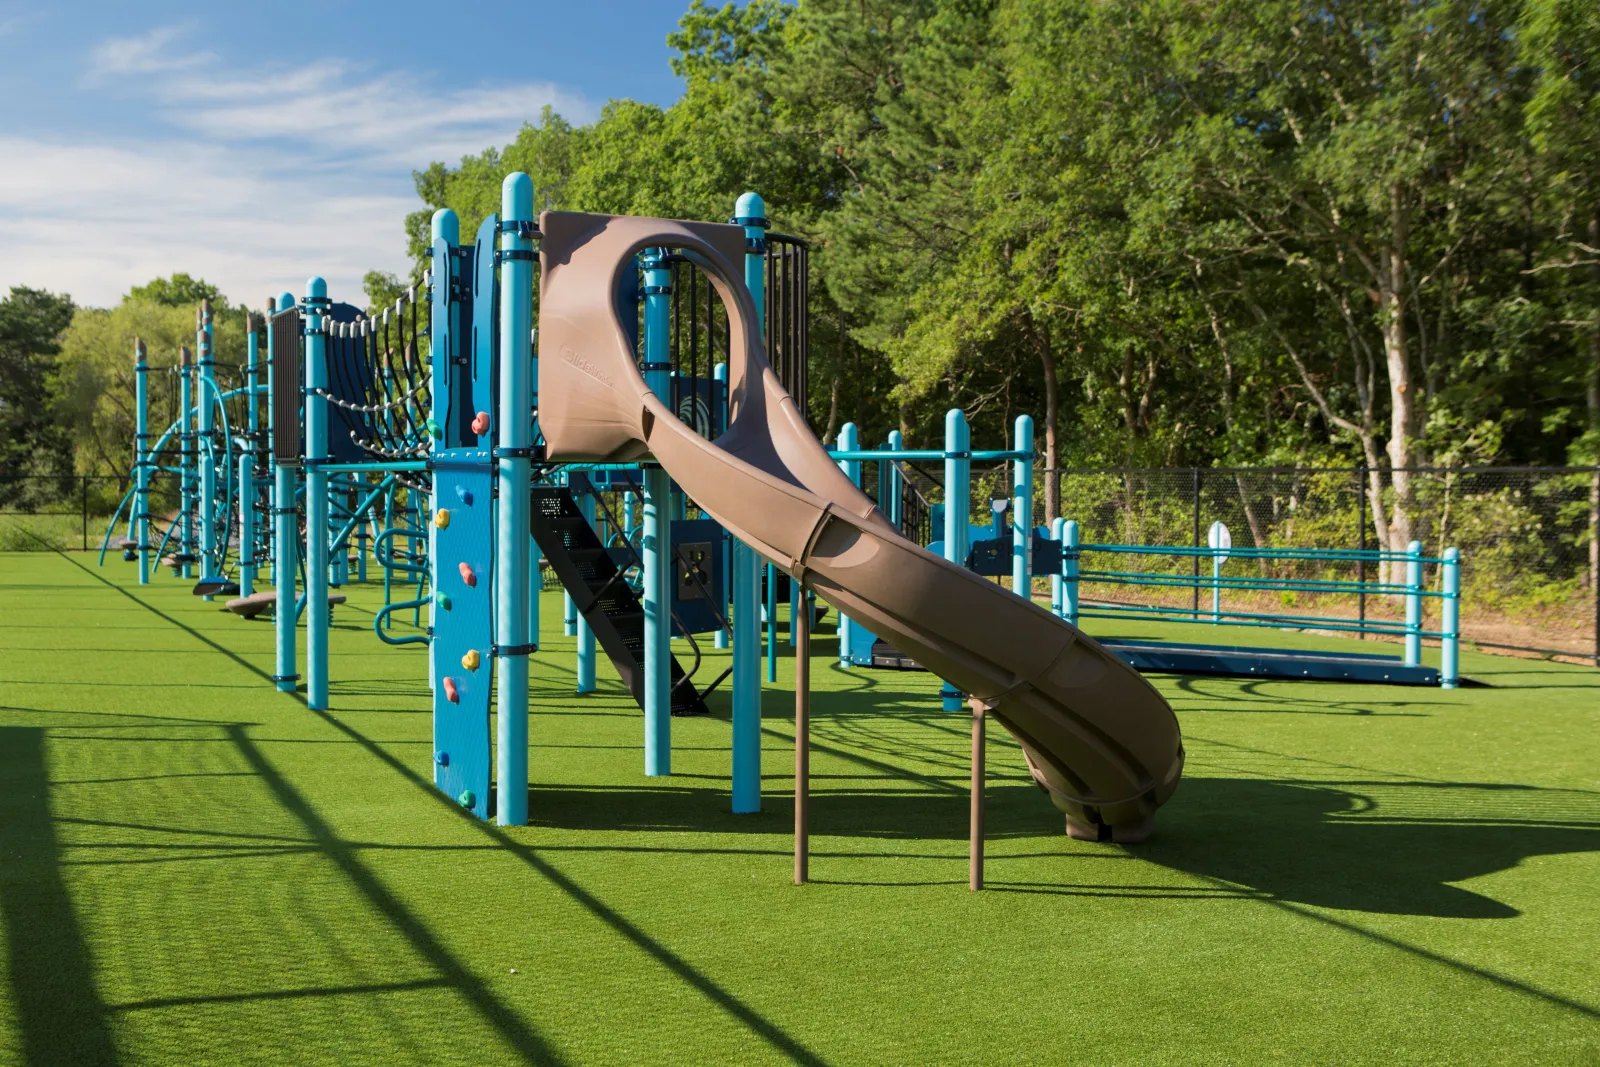 a playground with blue and green slide